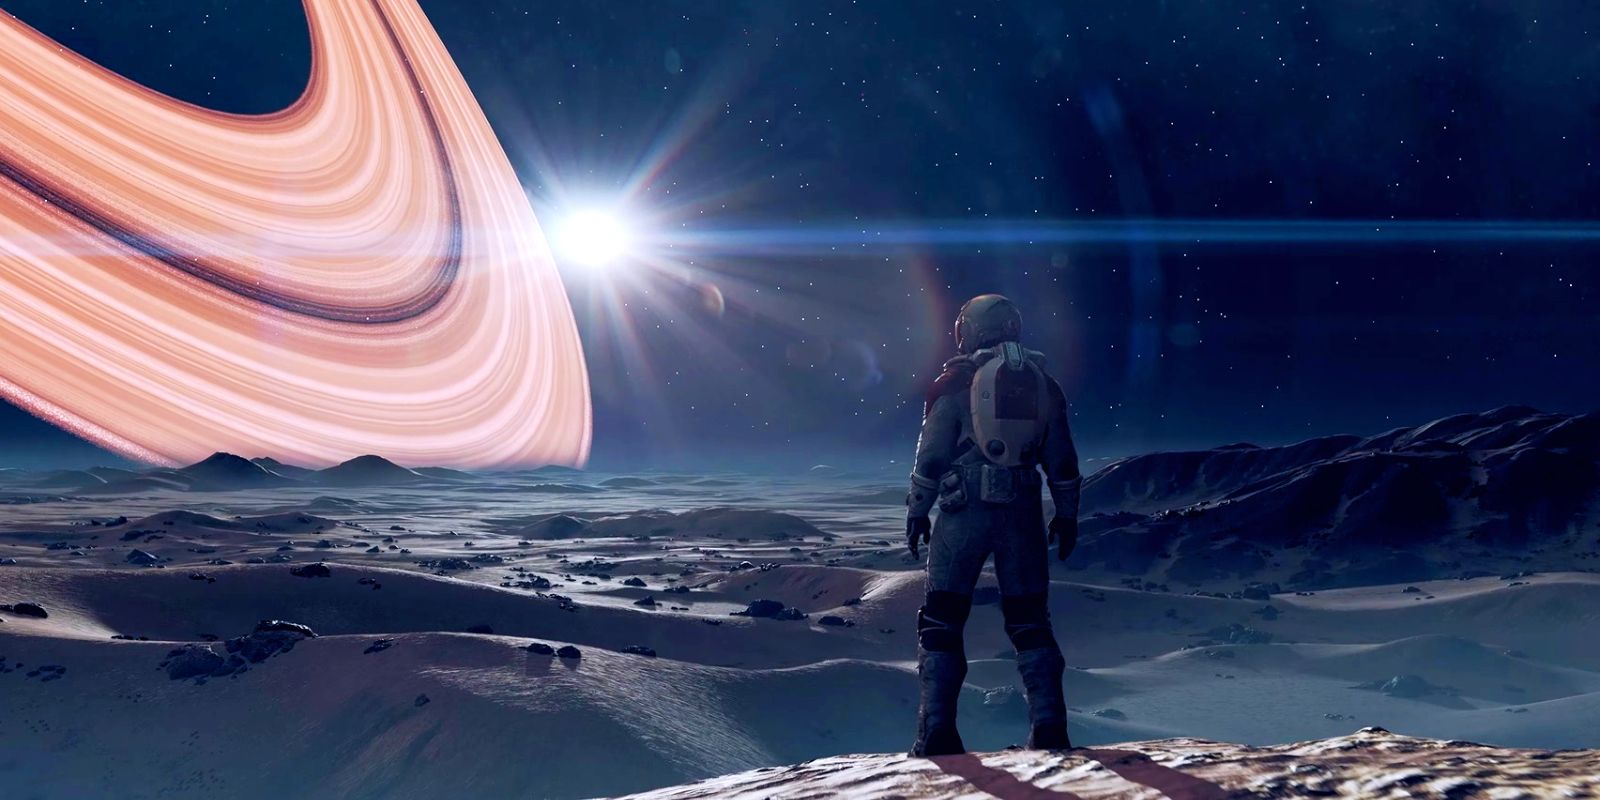 A Starfield character in a spacesuit stands on a hill, overlooking the rocky landscape of a moon. The bright orange rings of a planet dominate the sky, next to a bright star.